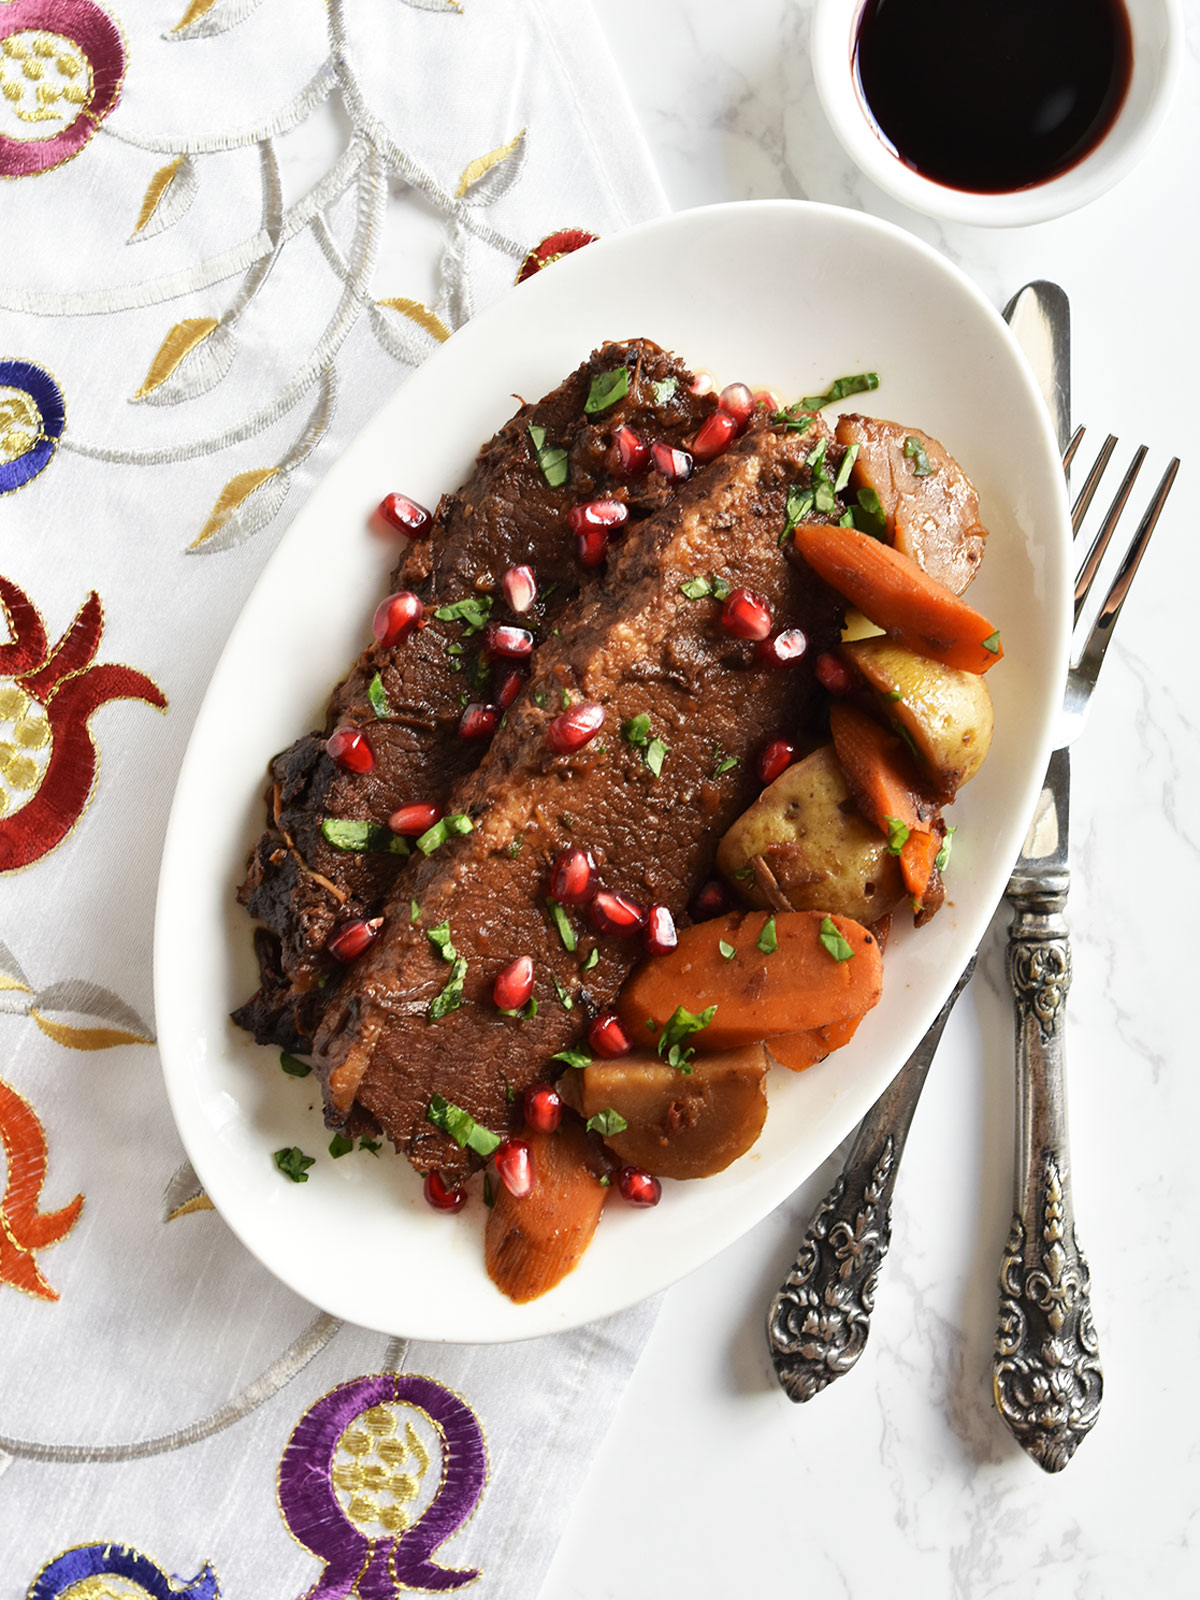 Pressure cooker brisket with pomegranate molasses on a white plate with carrots and potatoes on a pomegranate design napkin.